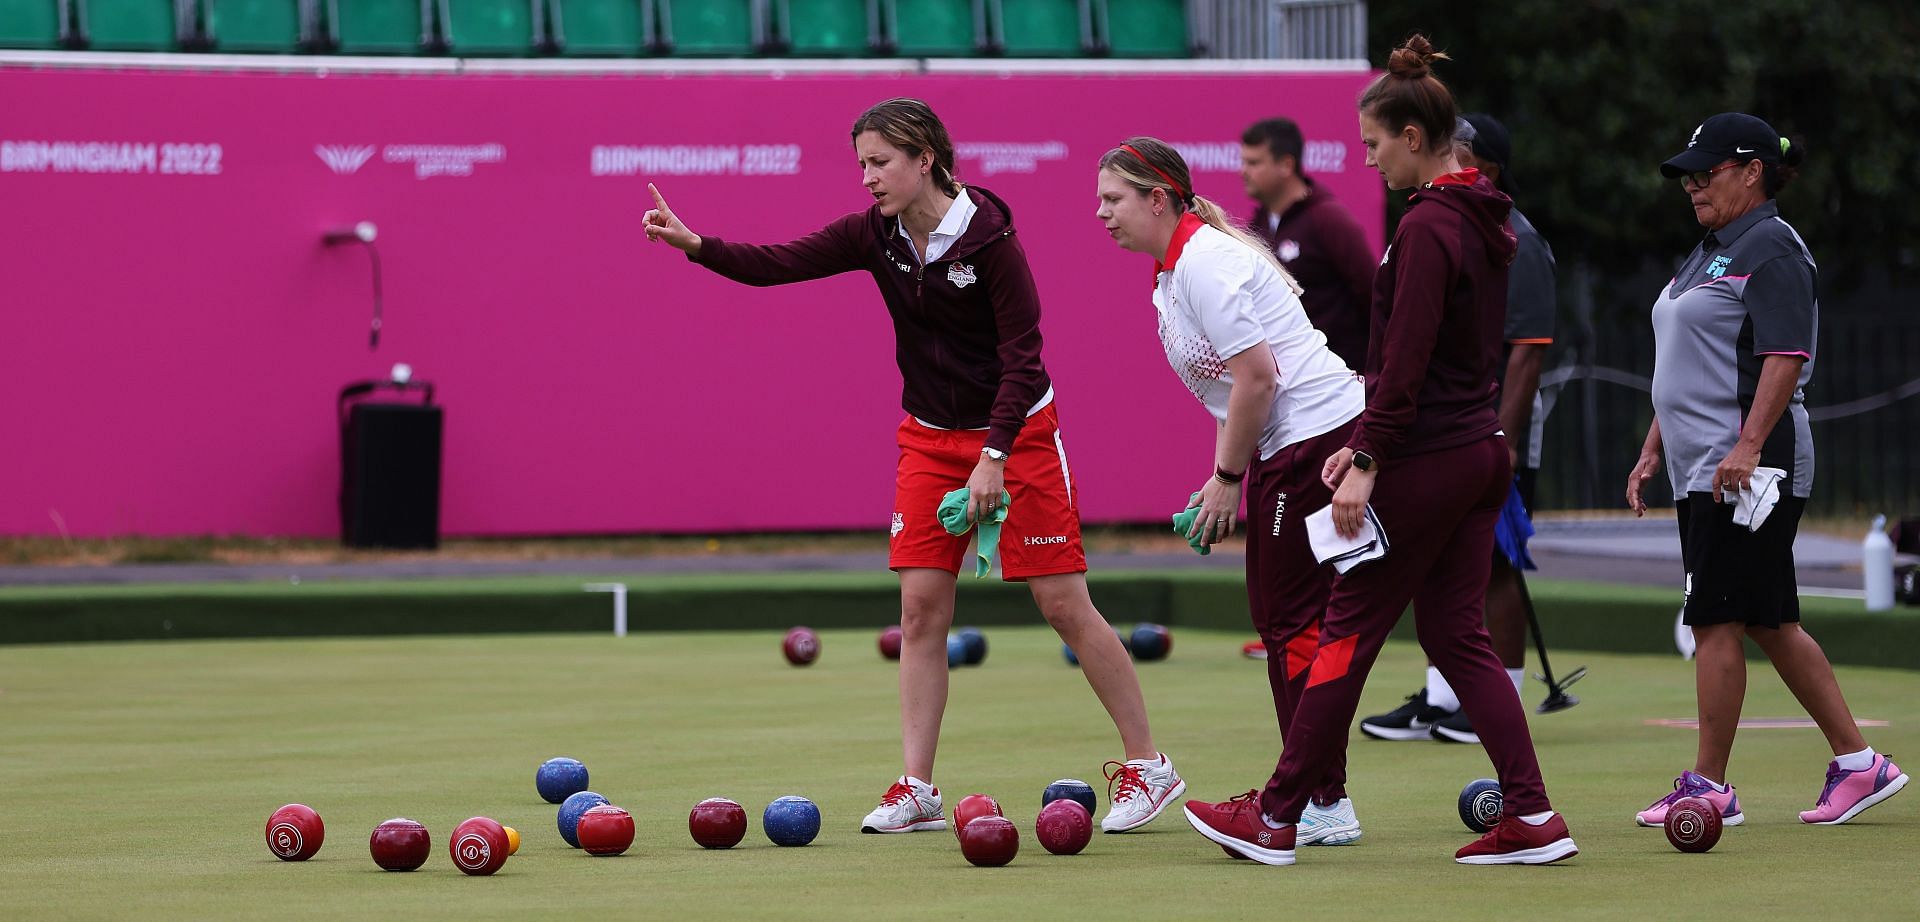 Previews - Team England Practice practice ahead of the Birmingham 2022 Commonwealth Games at Victoria Park (Image Courtesy: Getty)